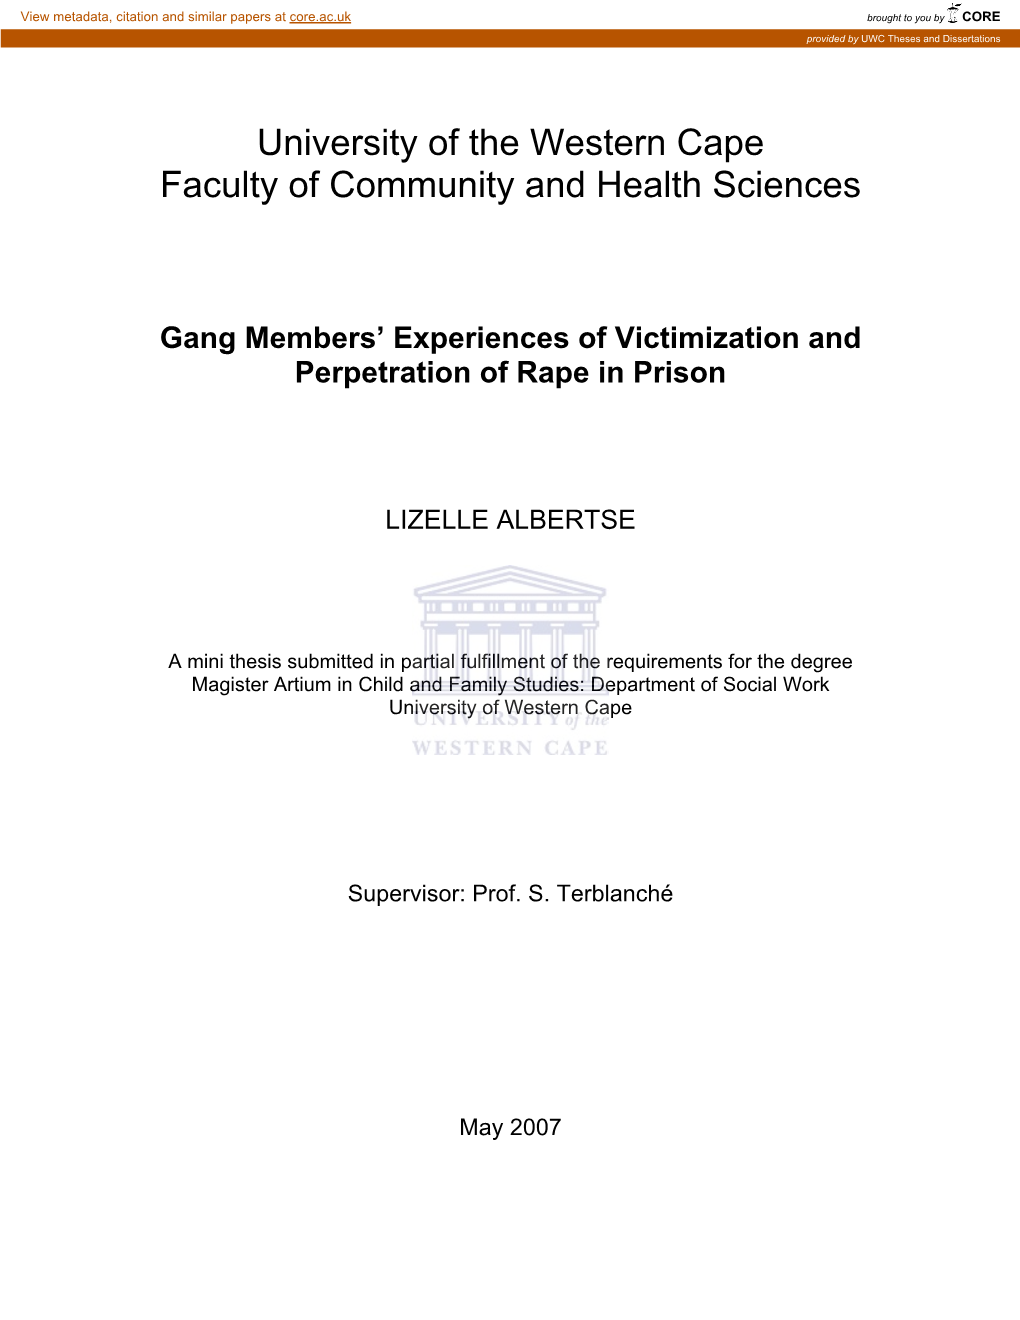 Gang Members' Experiences of Victimization and Perpetration Of